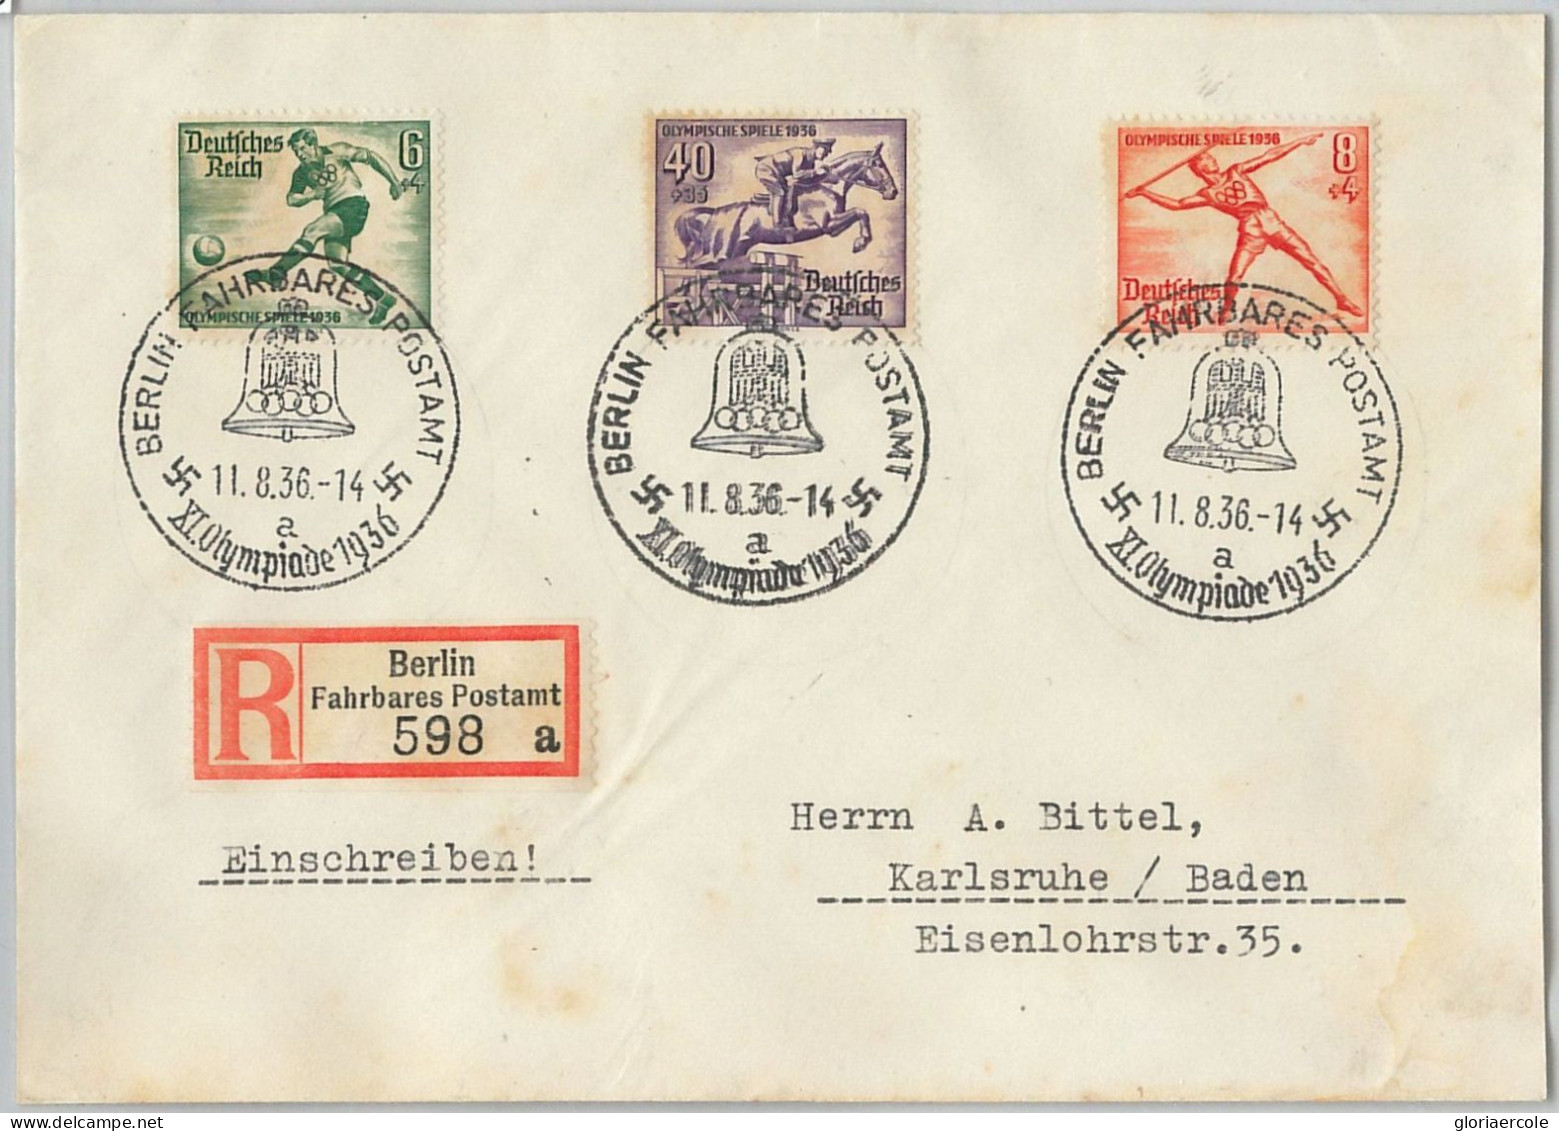 59953 - GERMANY - POSTAL HISTORY - REGISTERED COVER: OLYMPIC GAMES 1936 - Sommer 1936: Berlin